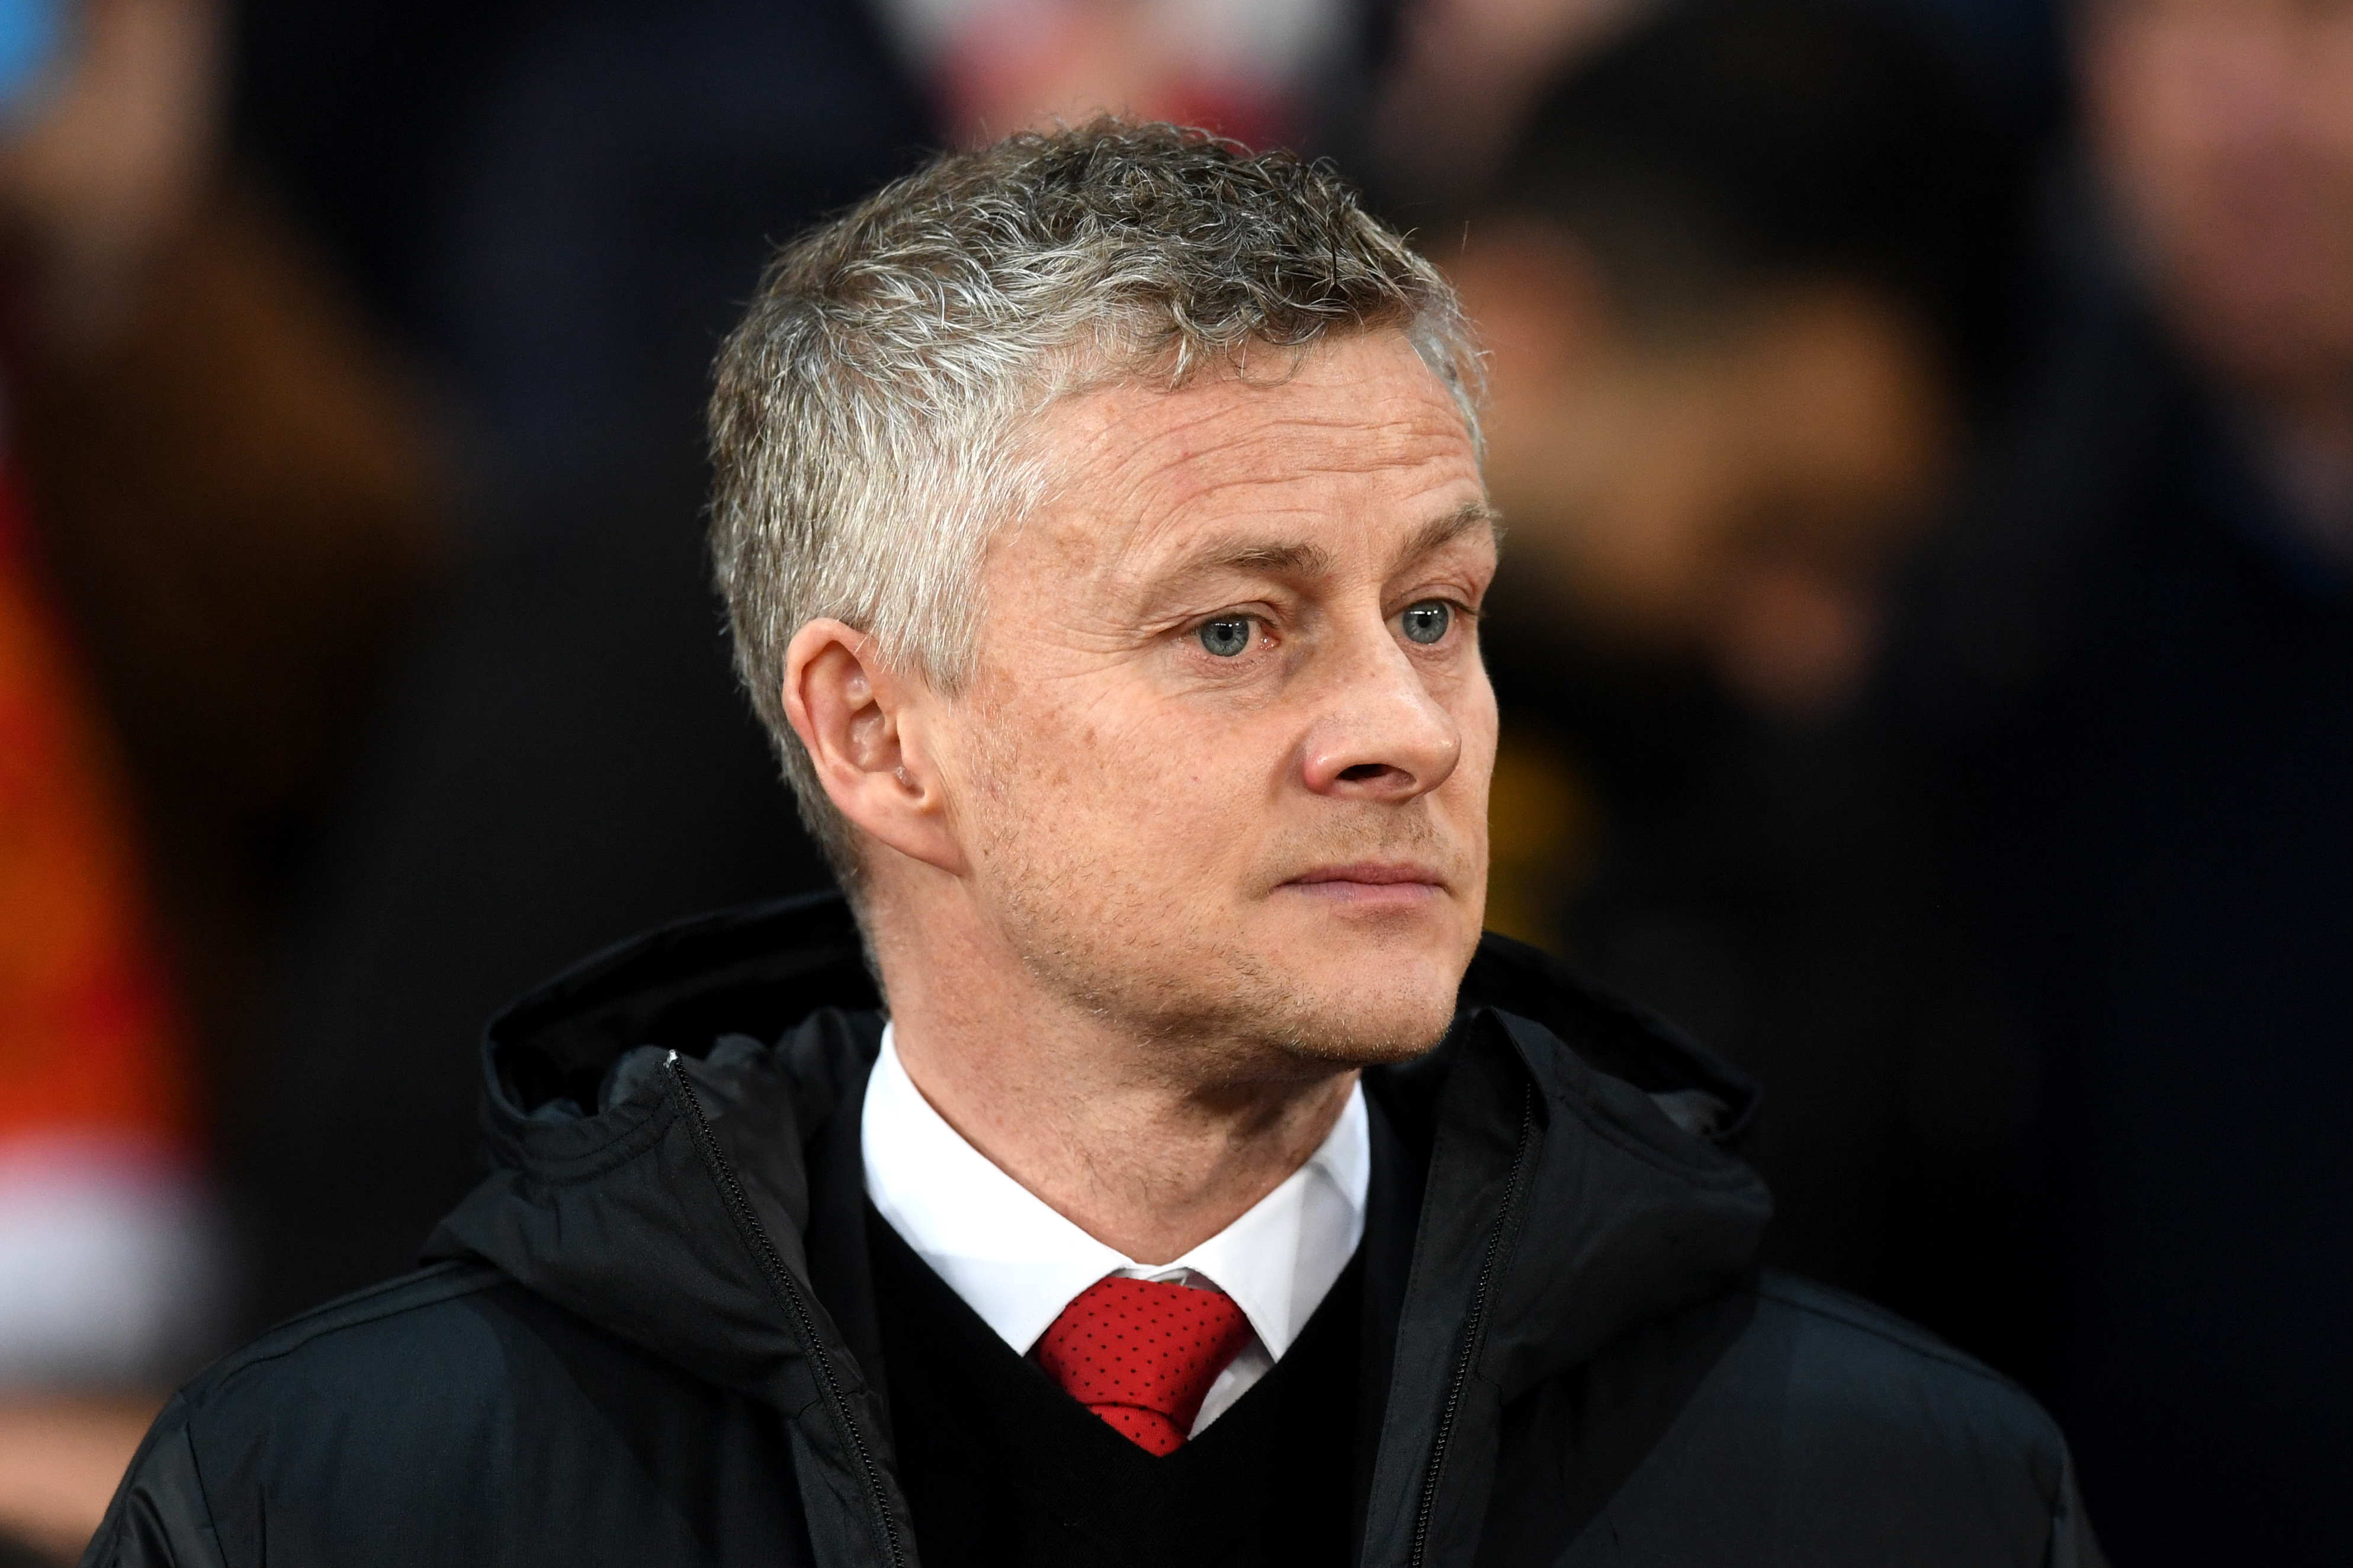 MANCHESTER, ENGLAND - FEBRUARY 12: Ole Gunnar Solskjaer, Manager of Manchester United during the UEFA Champions League Round of 16 First Leg match between Manchester United and Paris Saint-Germain at Old Trafford on February 12, 2019 in Manchester, England. (Photo by Michael Regan/Getty Images)